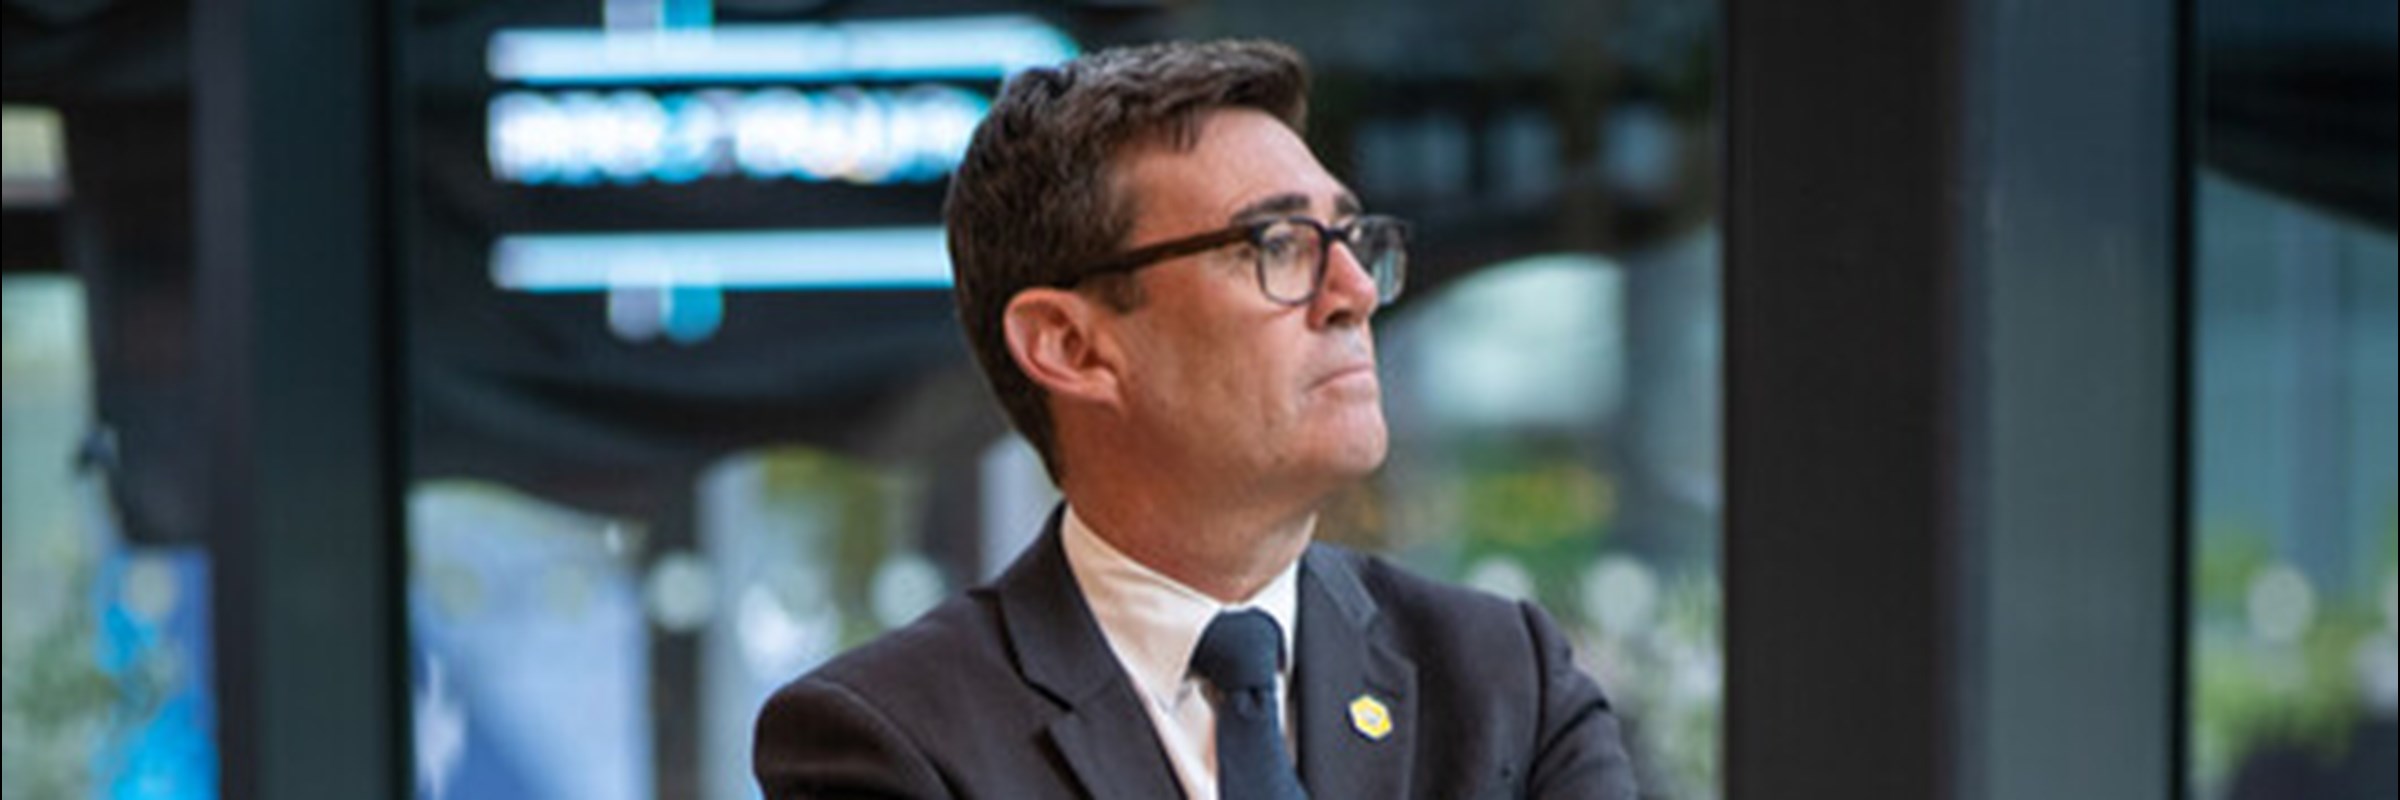 A photo of the Mayor of Greater Manchester, Andy Burnham